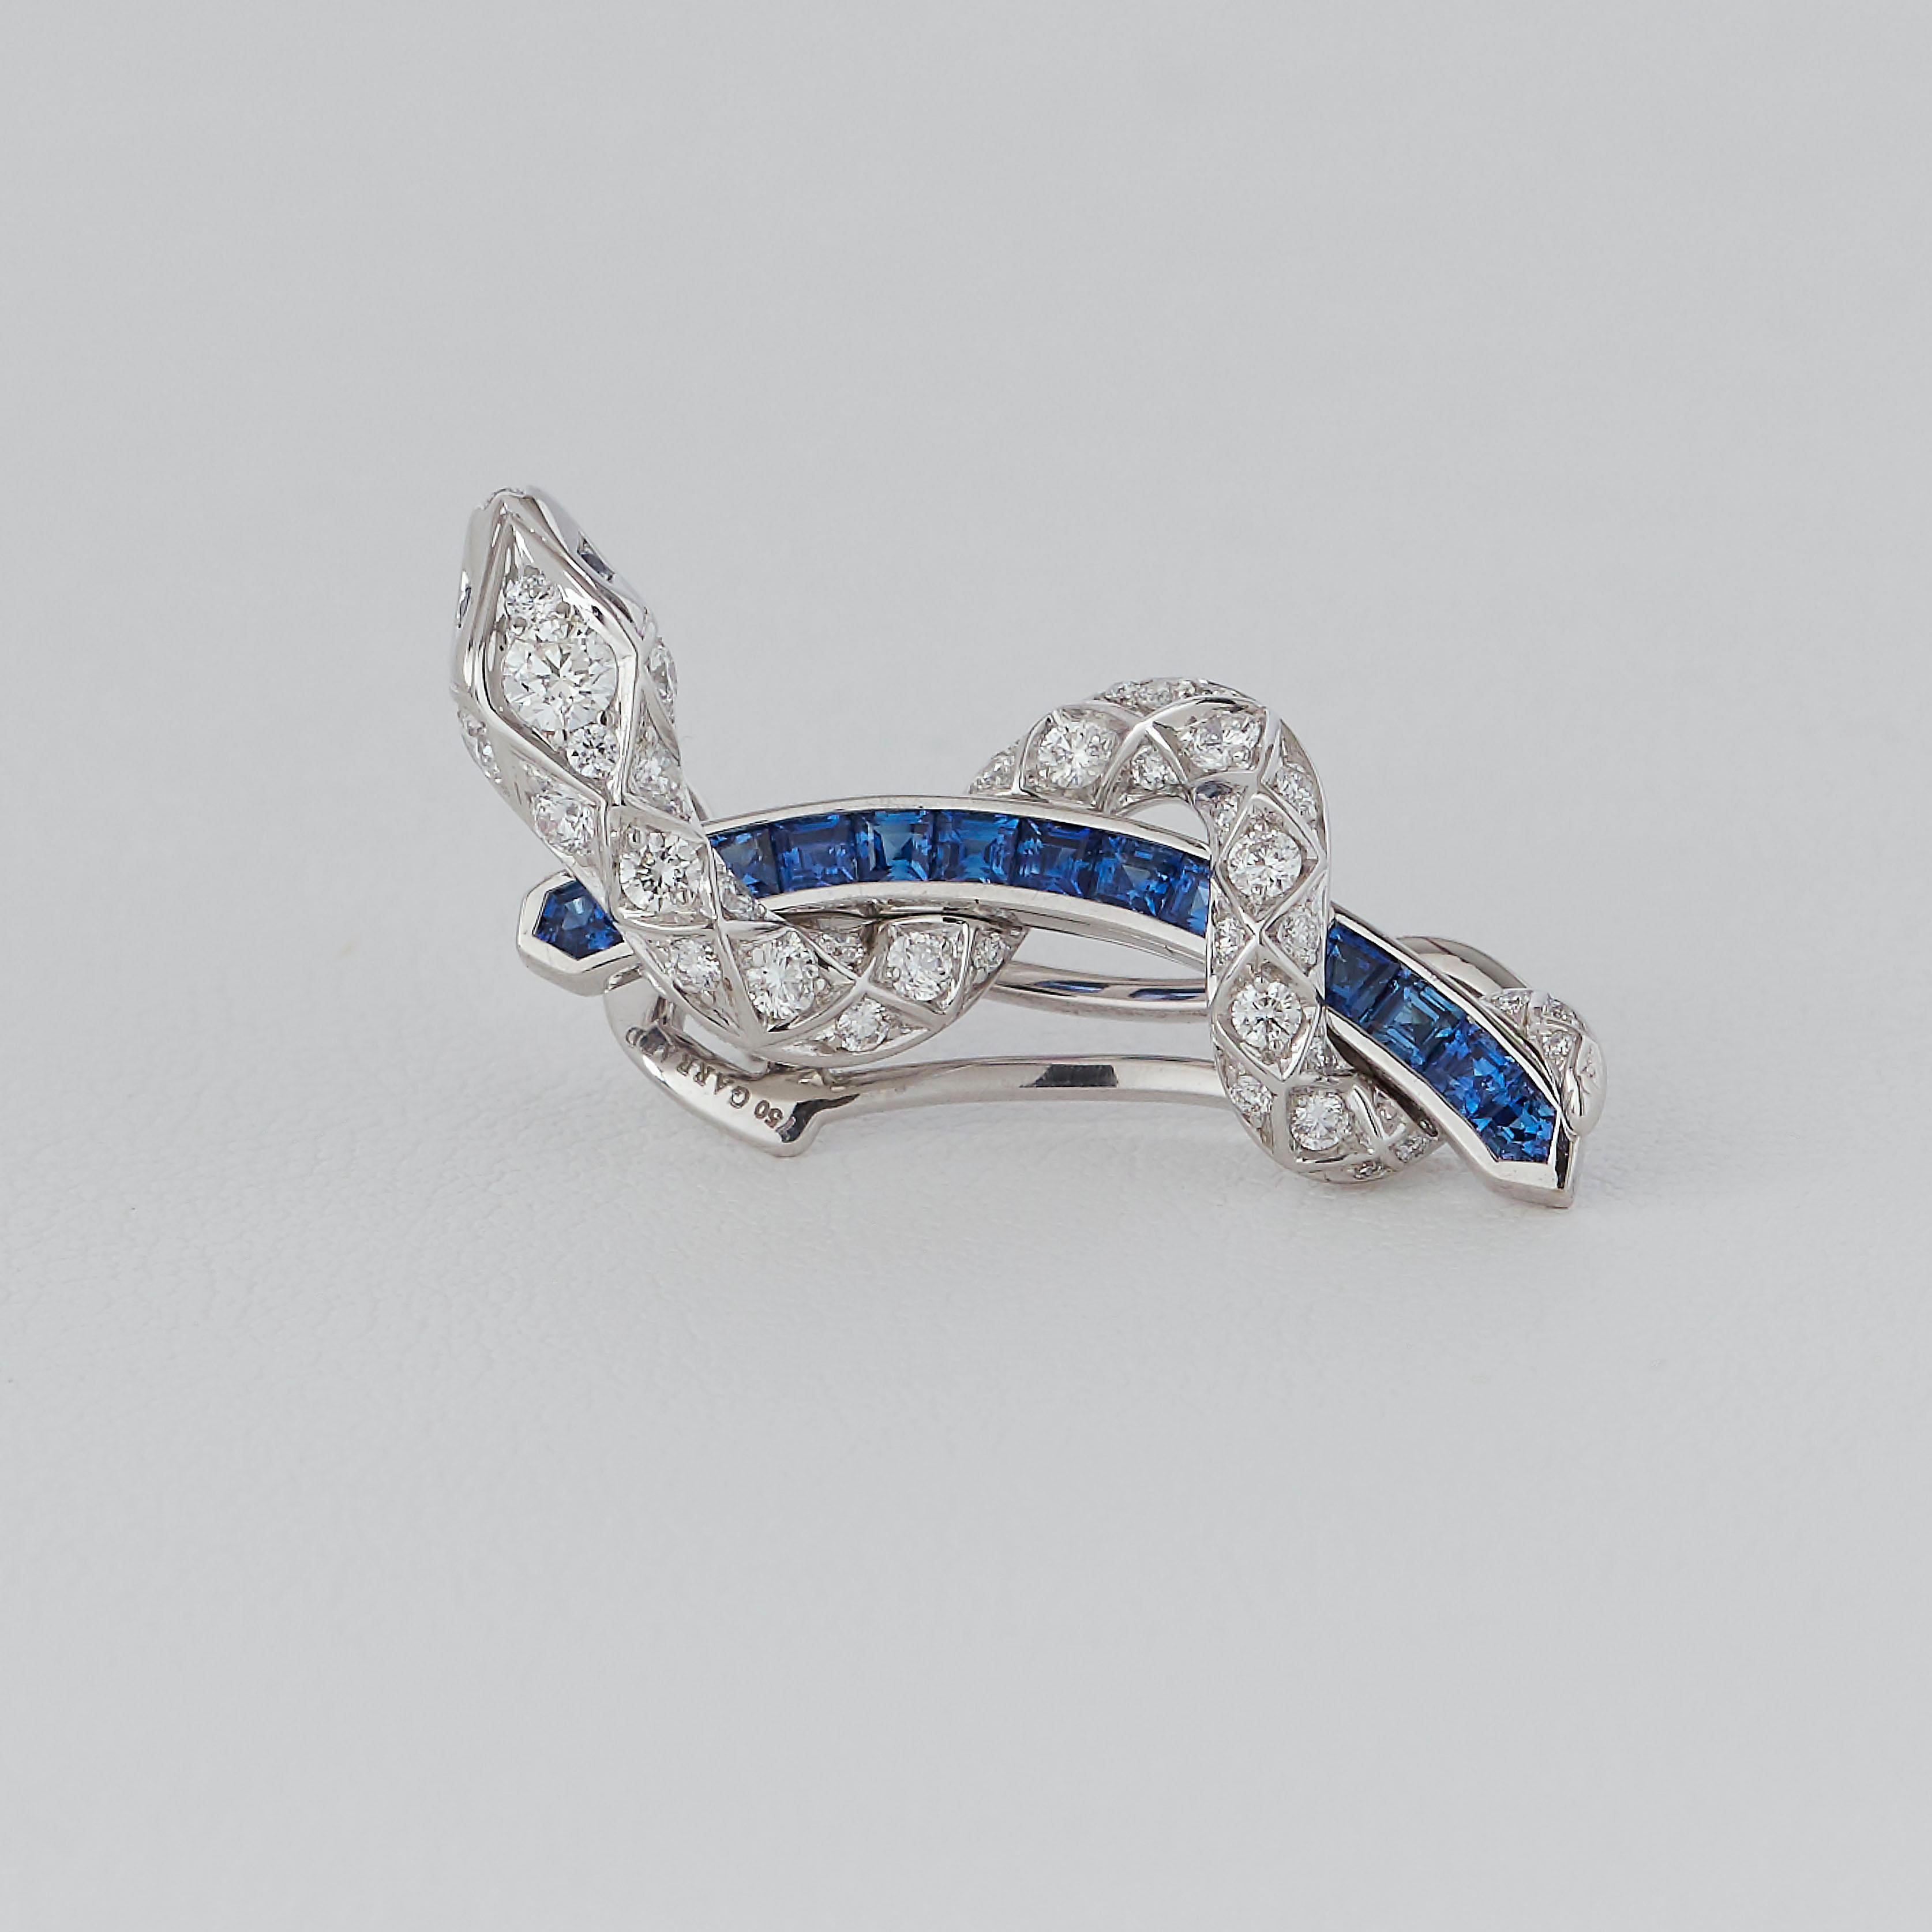 A House of Garrard pair of 18 karat white gold 'Signature Serpent' ear-climbers from the 'Muse' collection, set with round white diamonds and round and calibre-cut blue sapphires.

4 blue sapphire eyes weighing .03ct
24 blue sapphires weighing